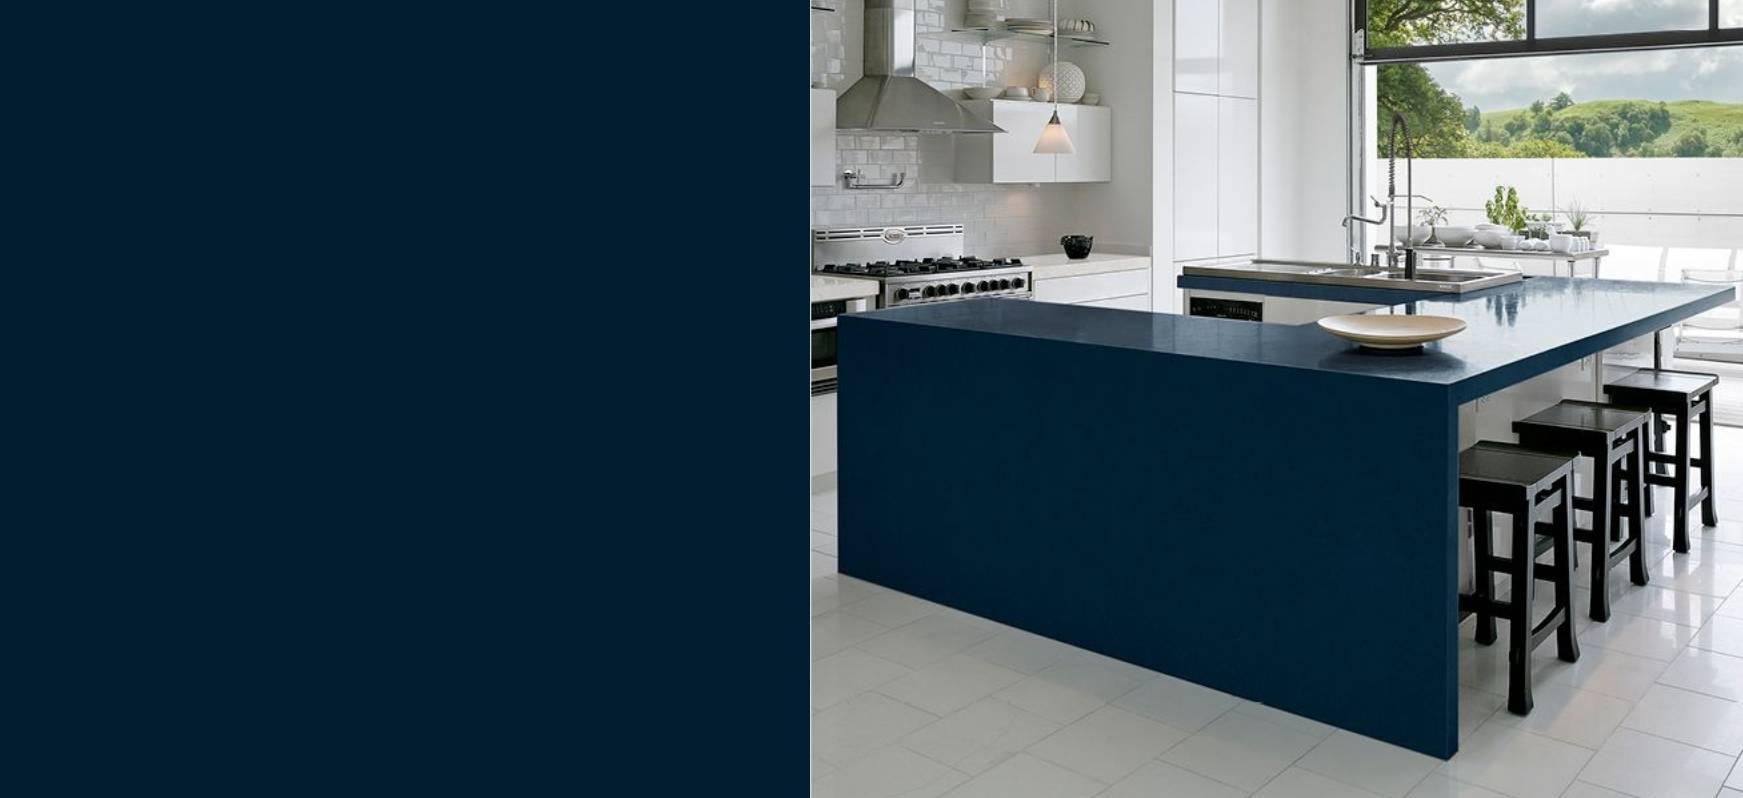 Hadley Cambria Quartz Countertops with Waterfall Panel and Close up Blue Countertops